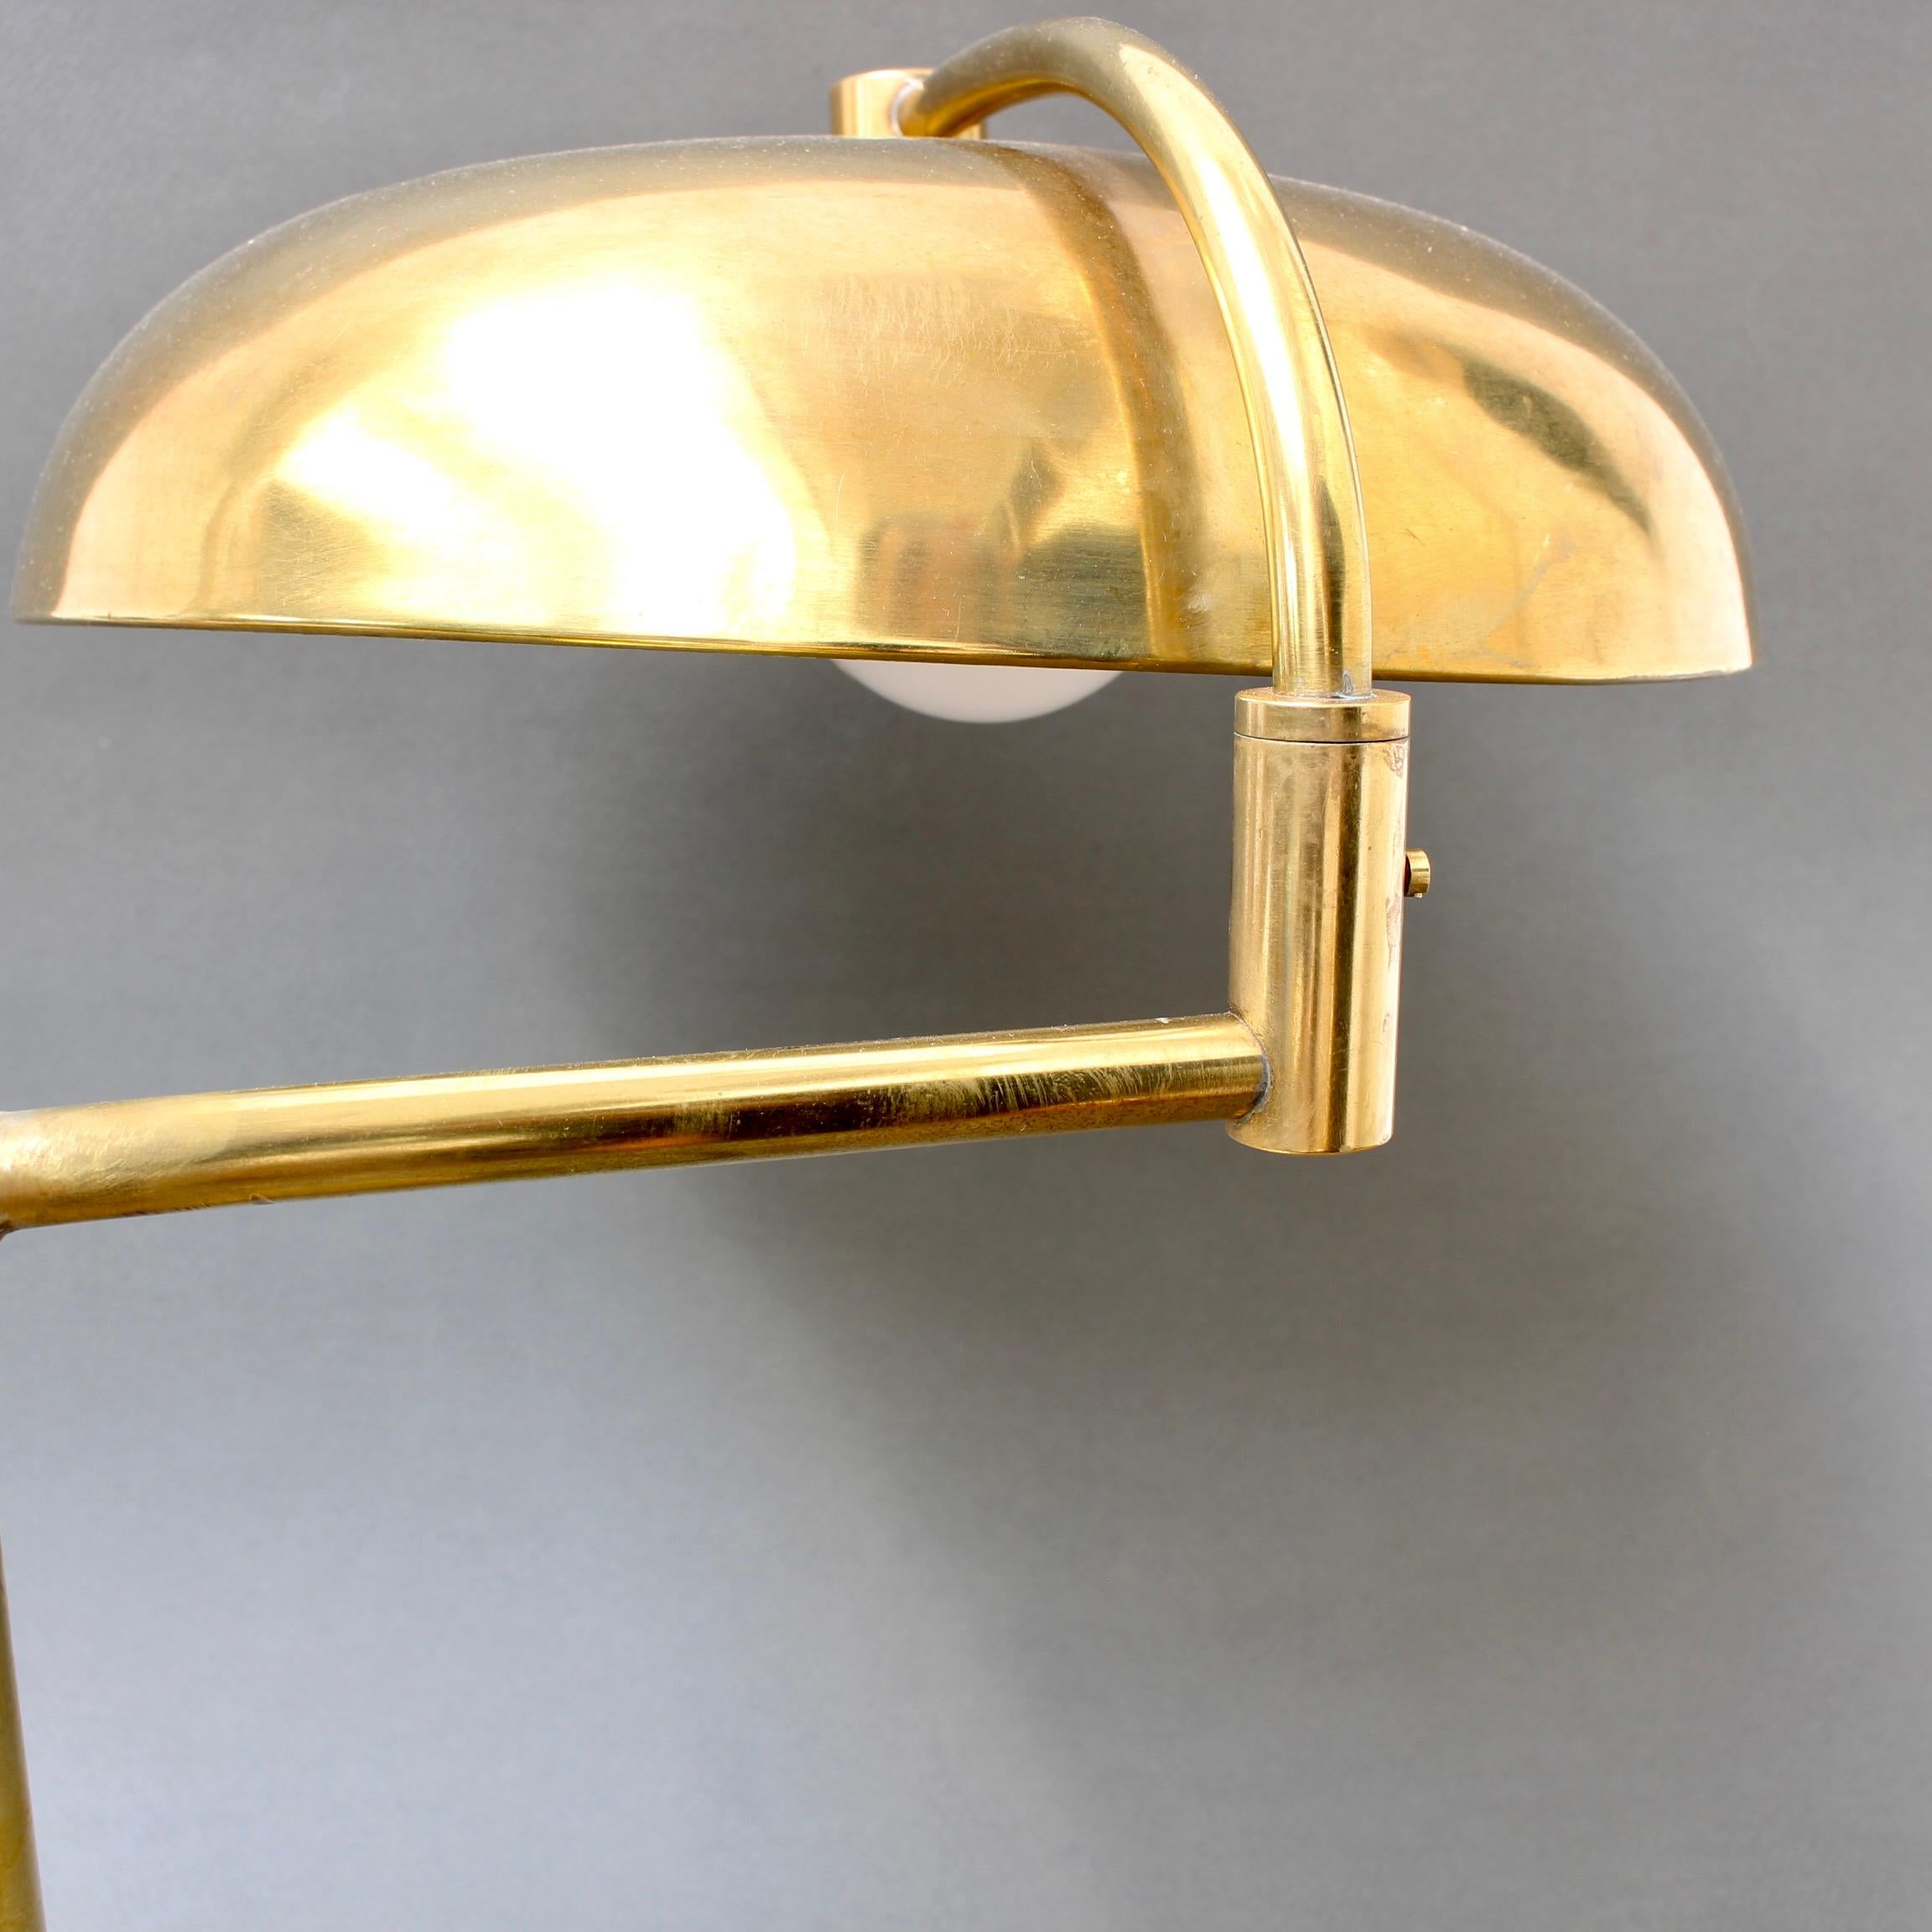 Italian Mid-Century Brass Table Lamp with Swivel Arm, circa 1950s For Sale 2